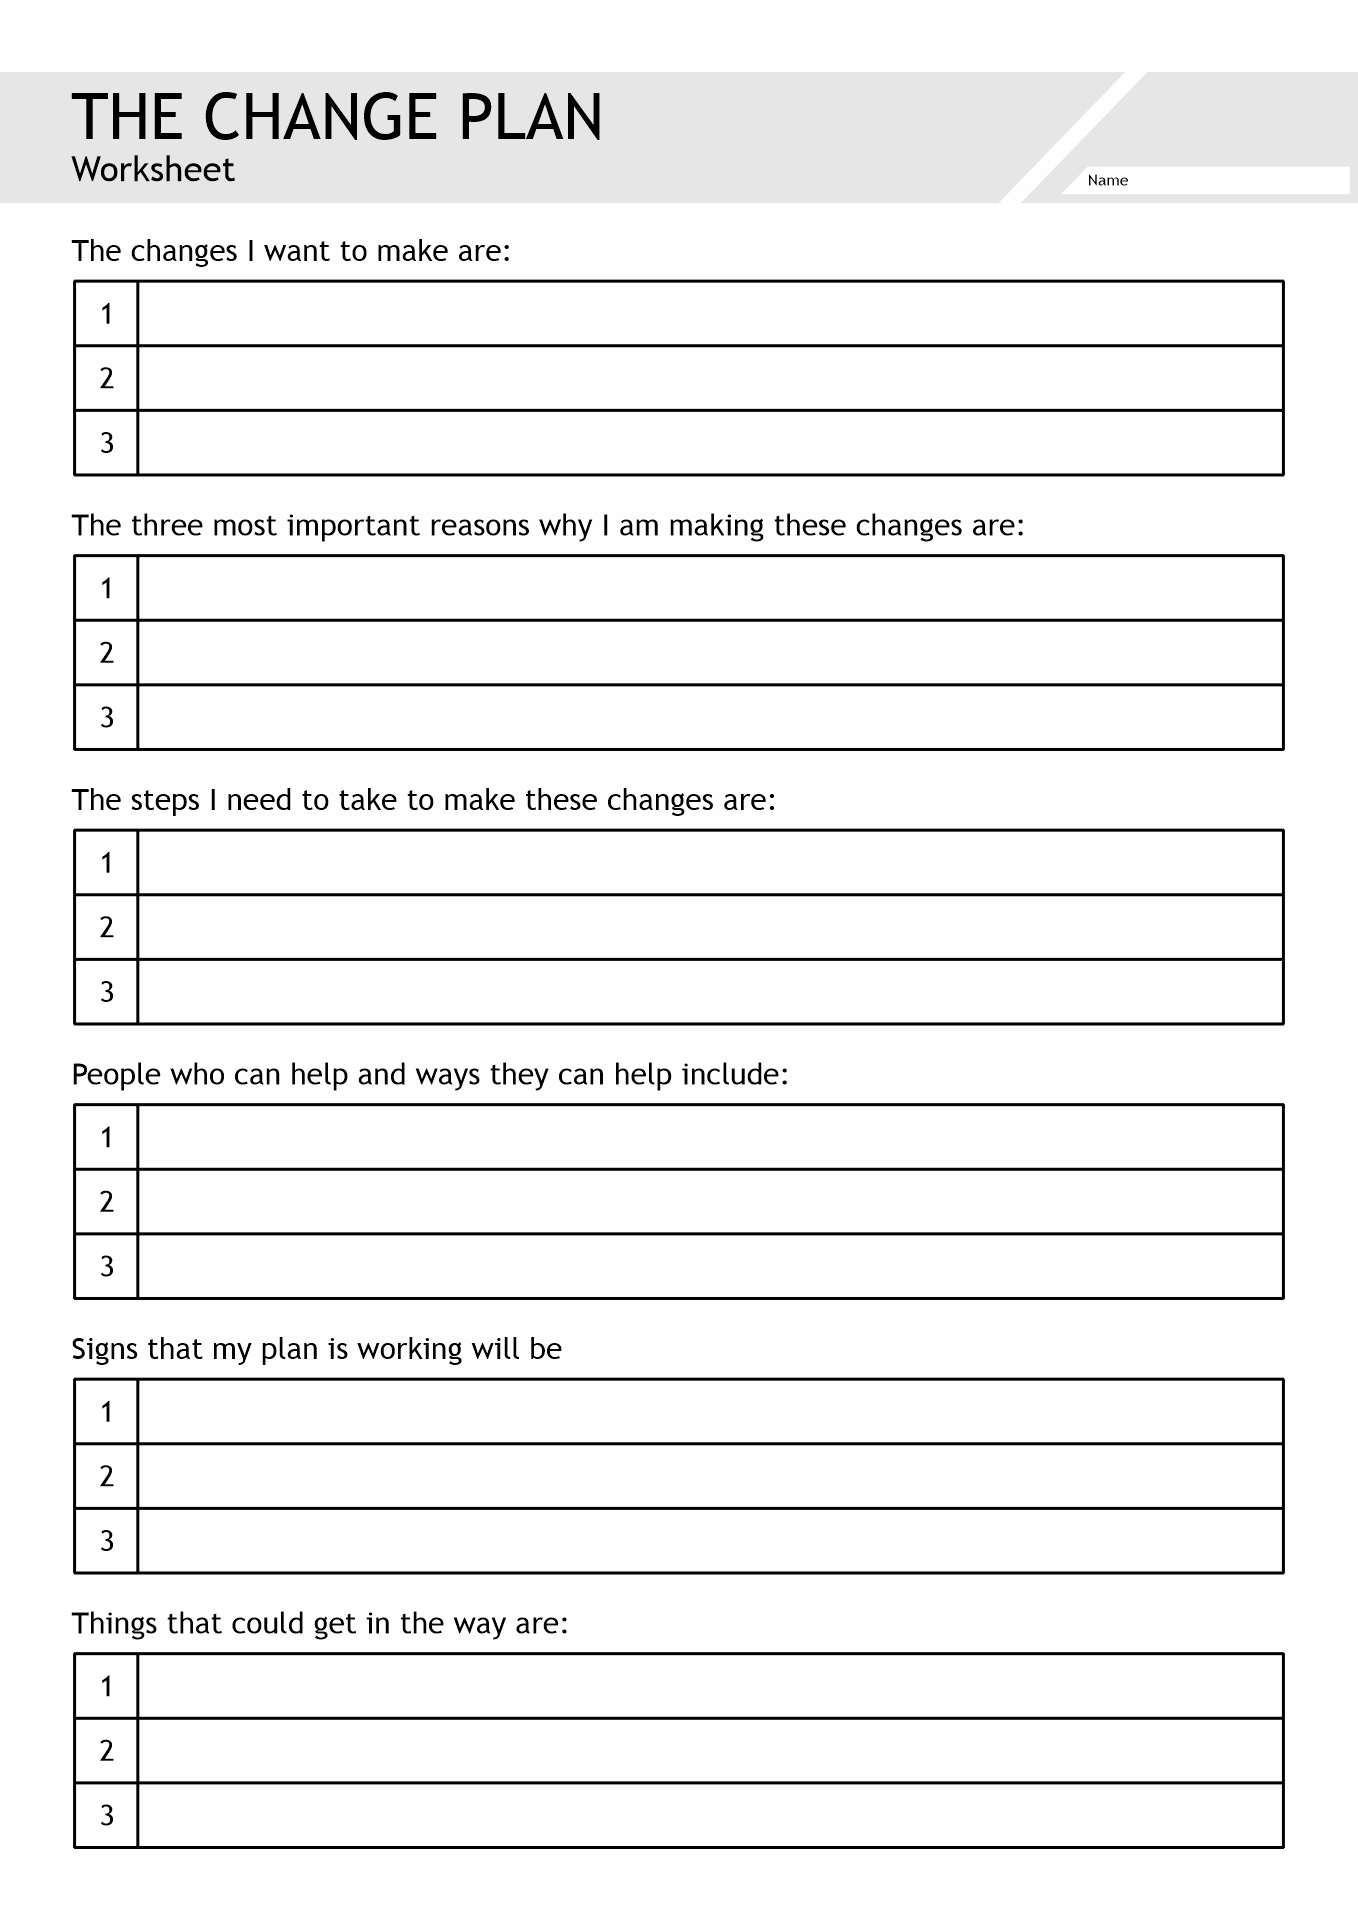 Drug Addiction Recovery Worksheets Image